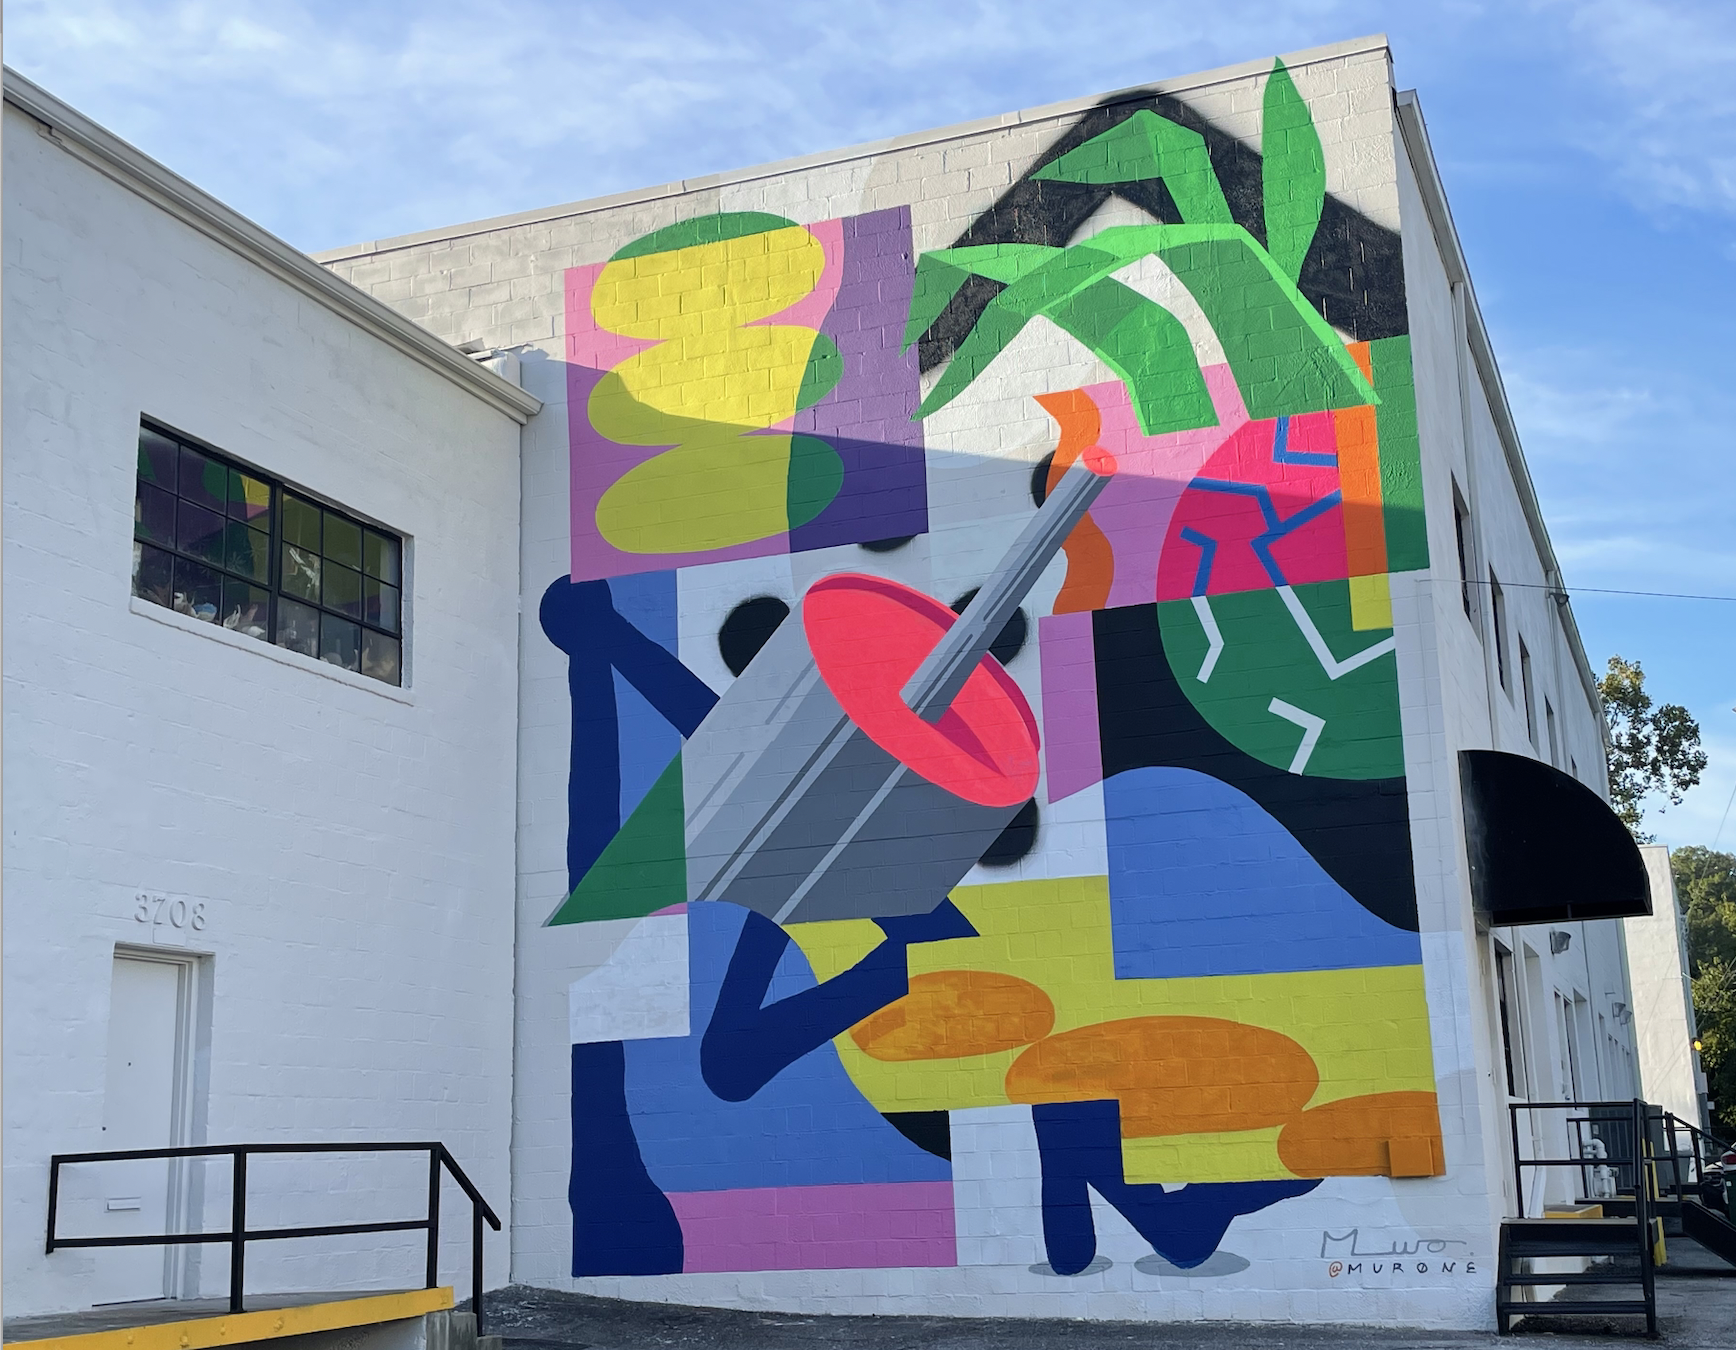 A Barcelona Artist Painted This Colorful New Route 1 Mural